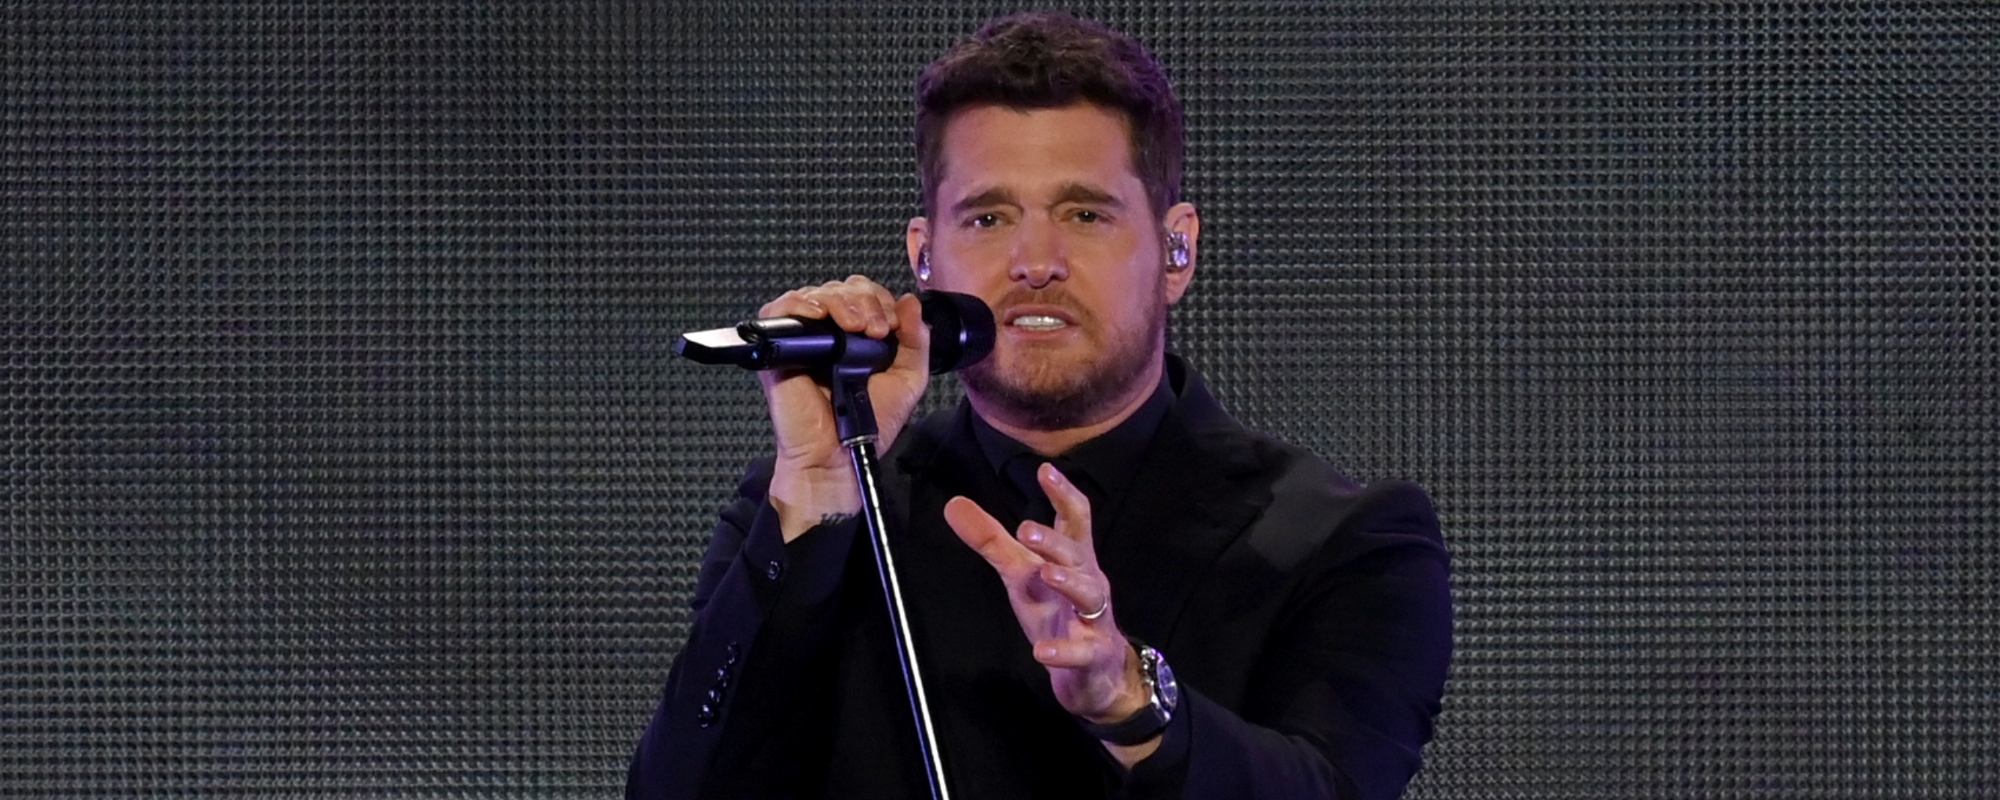 Michael Bublé Won’t Break His Christmas Collaboration Rule for Anyone but Cher